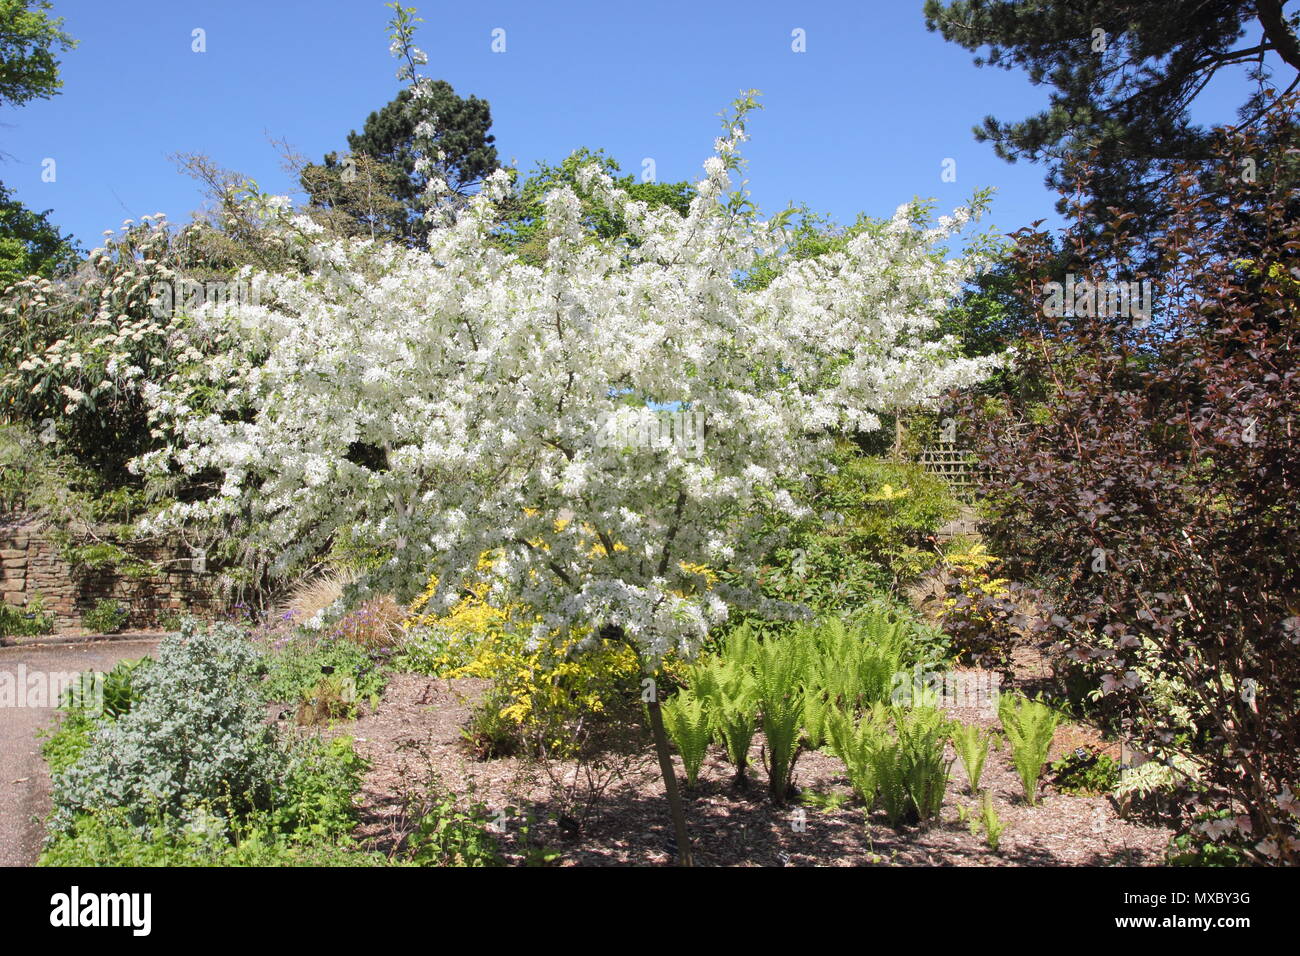 Malus transitoria. Cut leaf crab apple tree in full blossom in spring,, England, UK Stock Photo